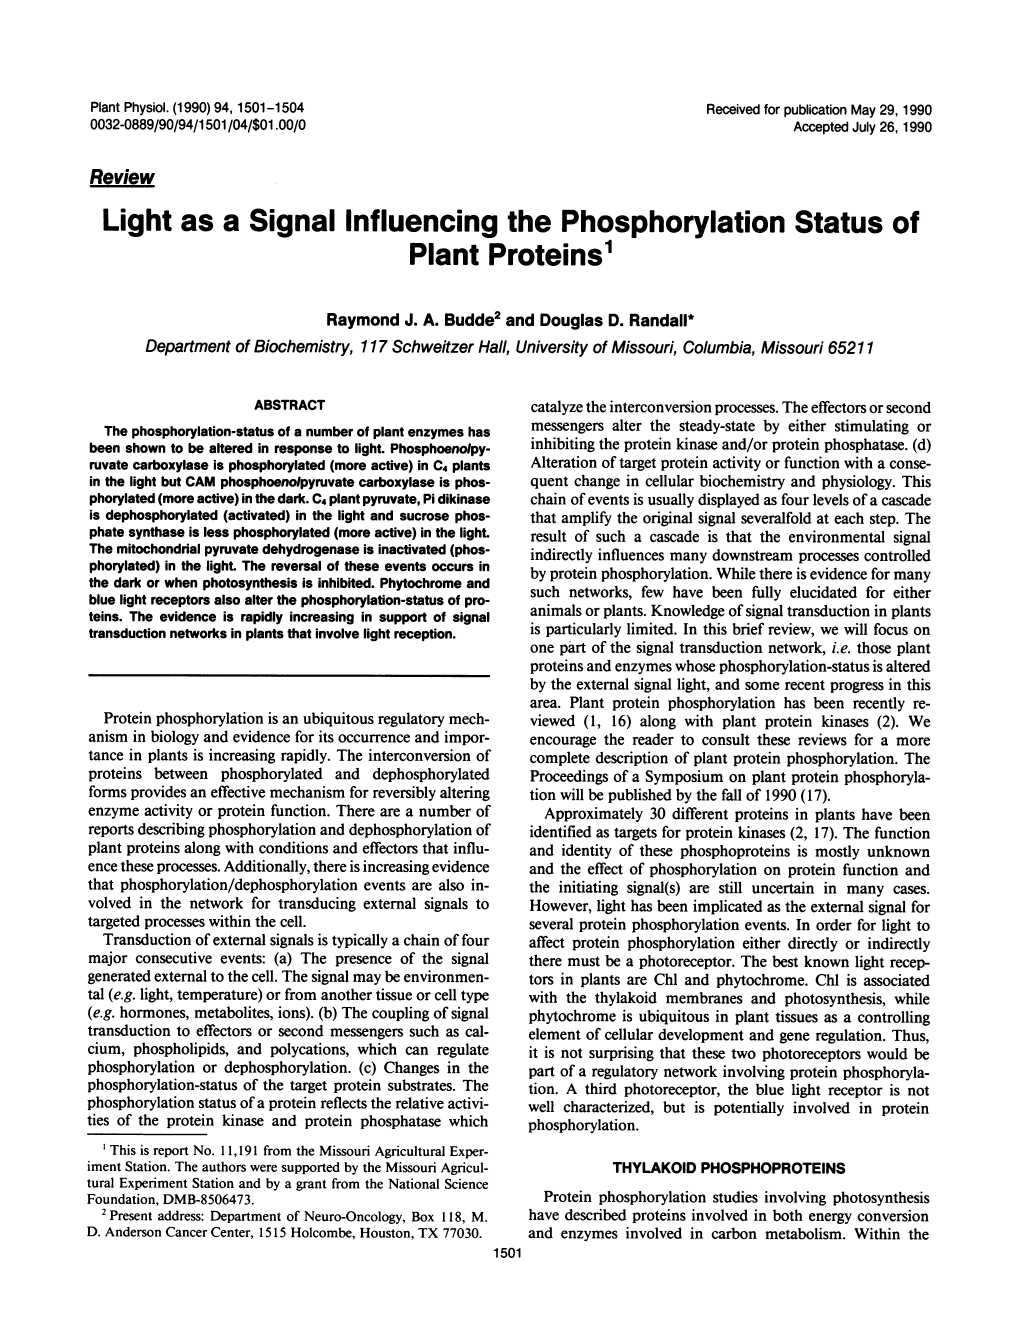 Light As a Signal Influencing the Phosphorylation Status of Plant Proteins1